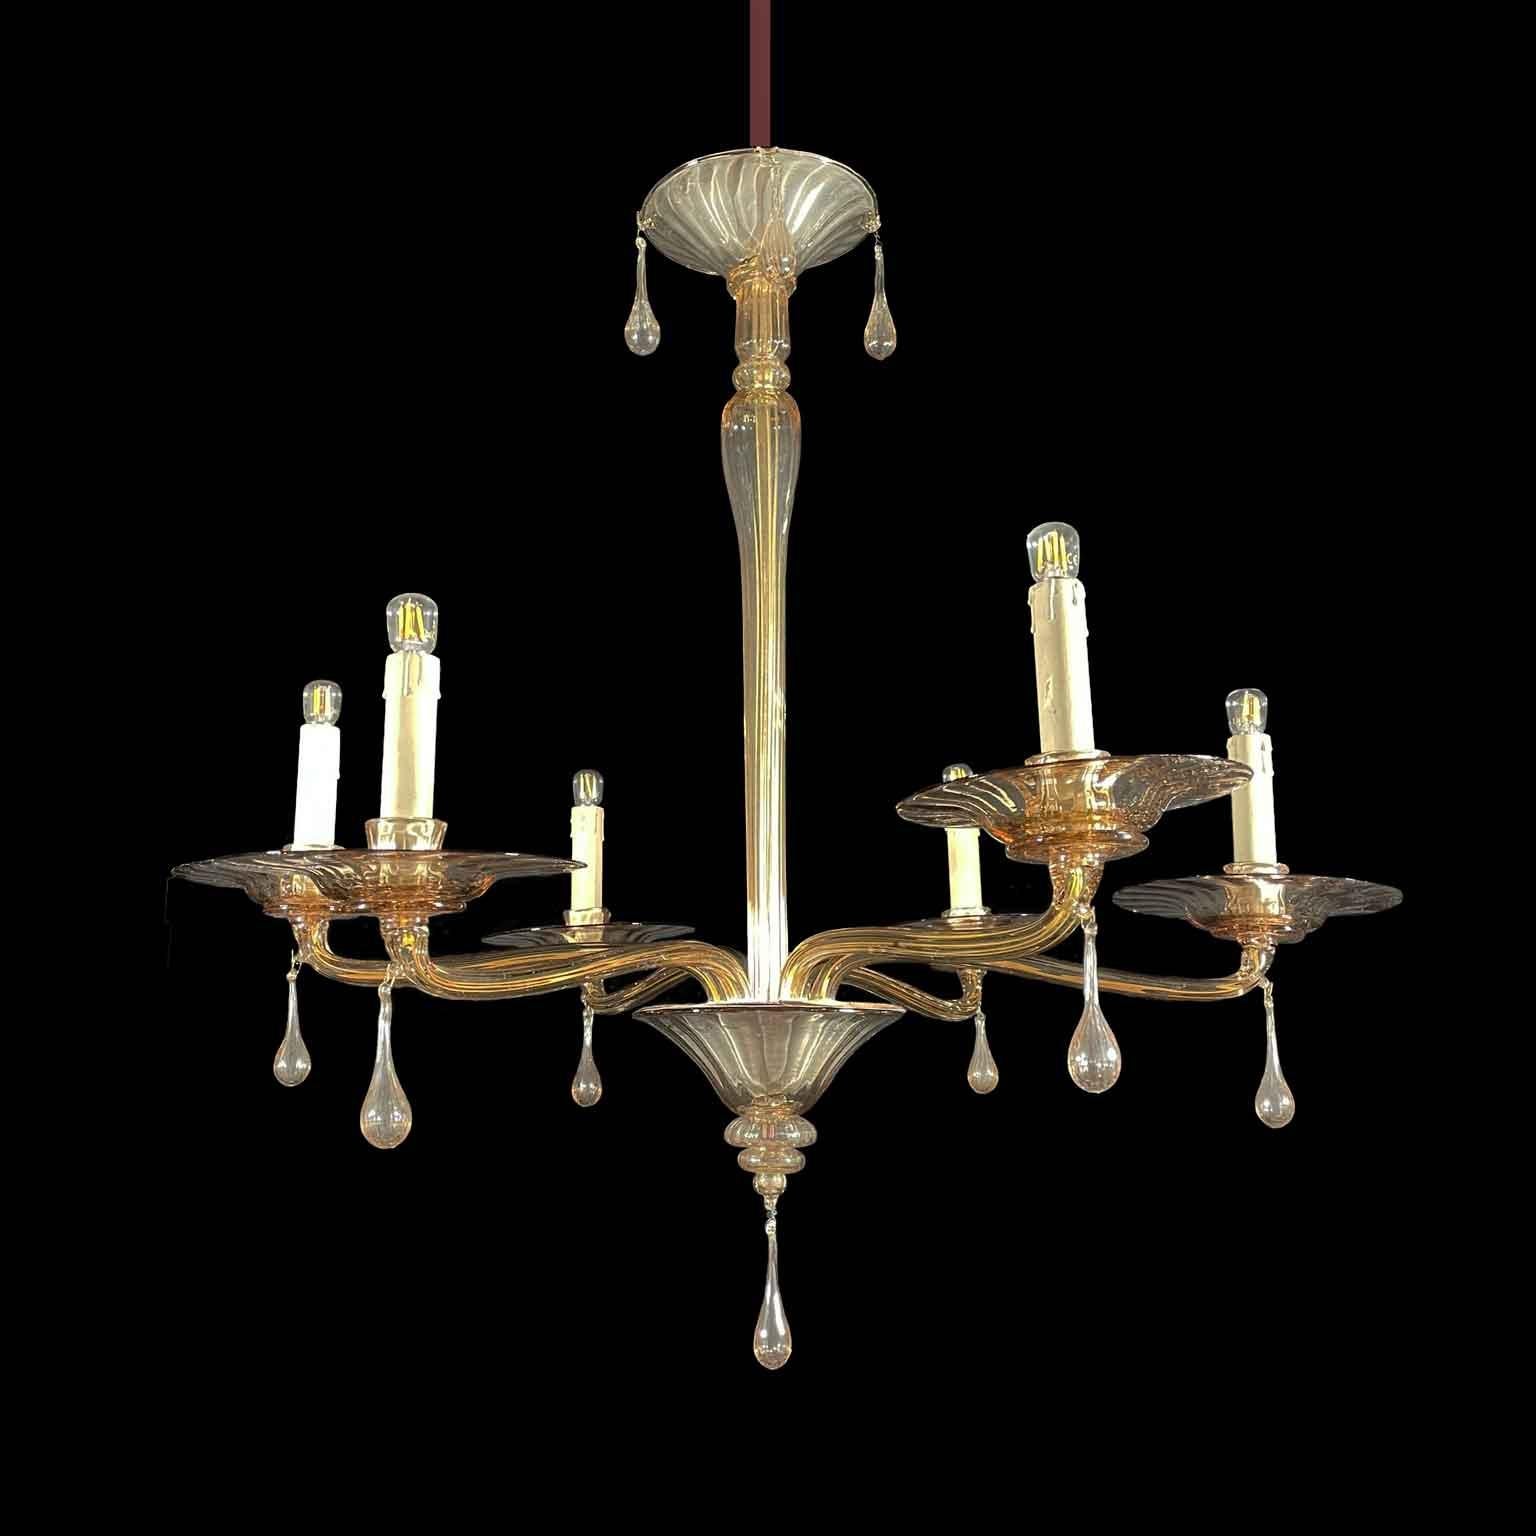 Blown Glass Chandelier Twenties with six arms in light mink color in perfect condition. Elegant Art Deco Venetian chandelier made of blown glass with a soft smoky amber hue in very light taupe, a warm color that embraces brown and taupe tones,with